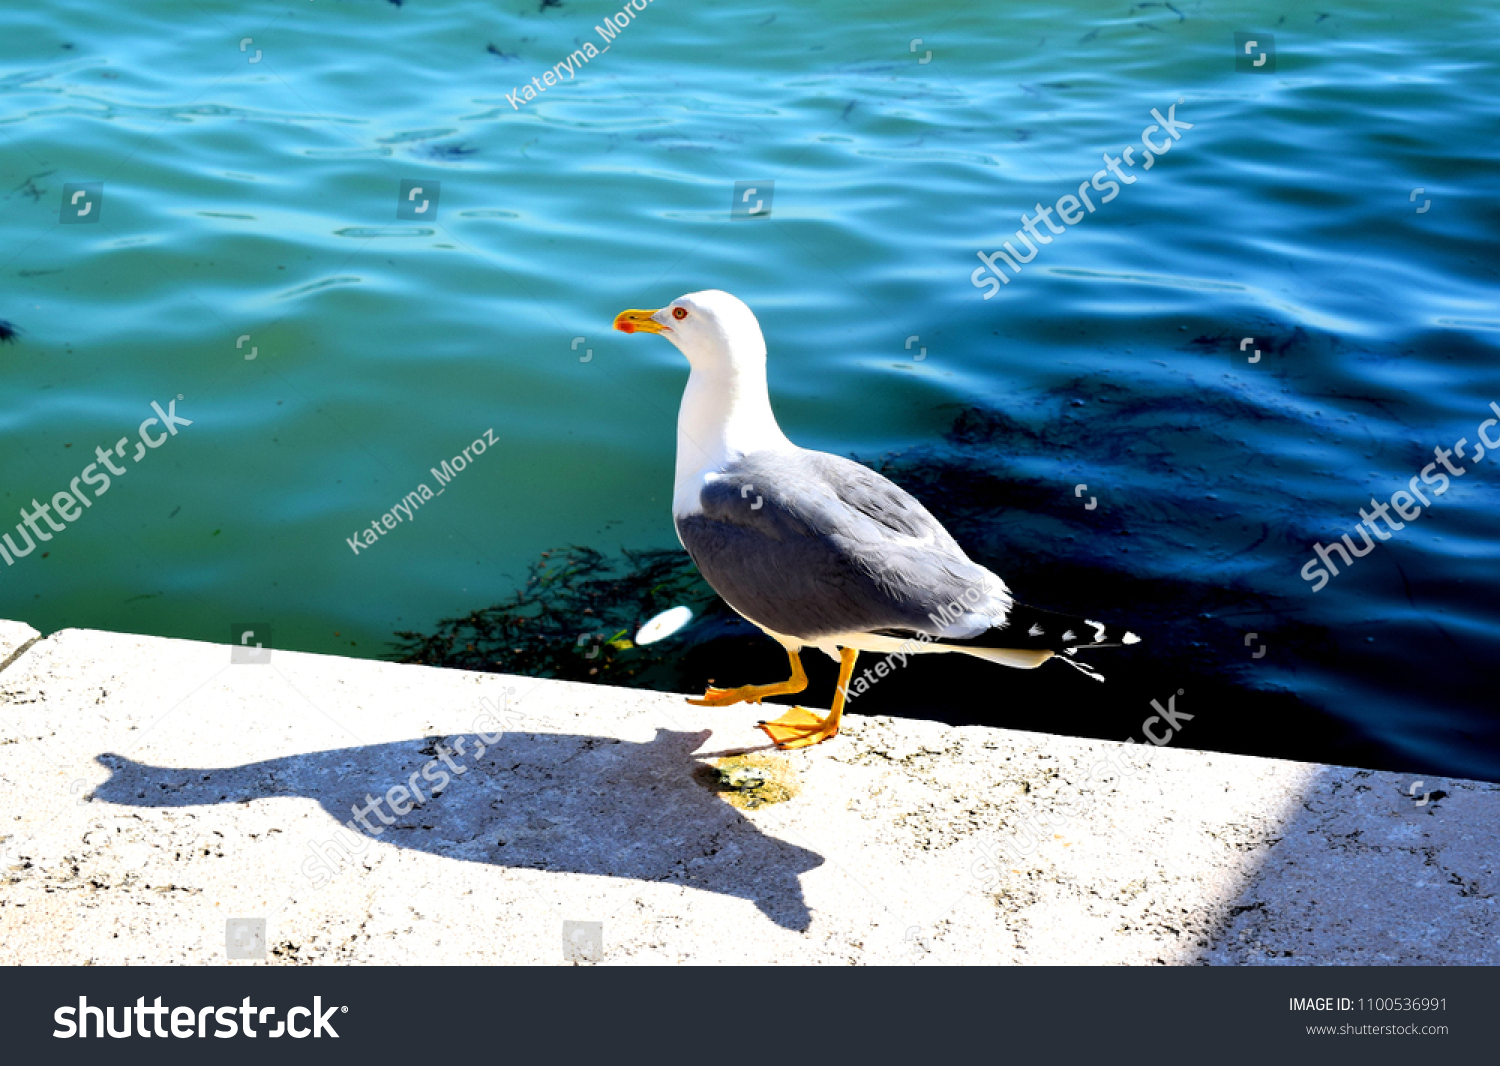 The European herring gull  is a large gull One of the best known of all gulls along the shores of western Europe, it was once abundant. #1100536991